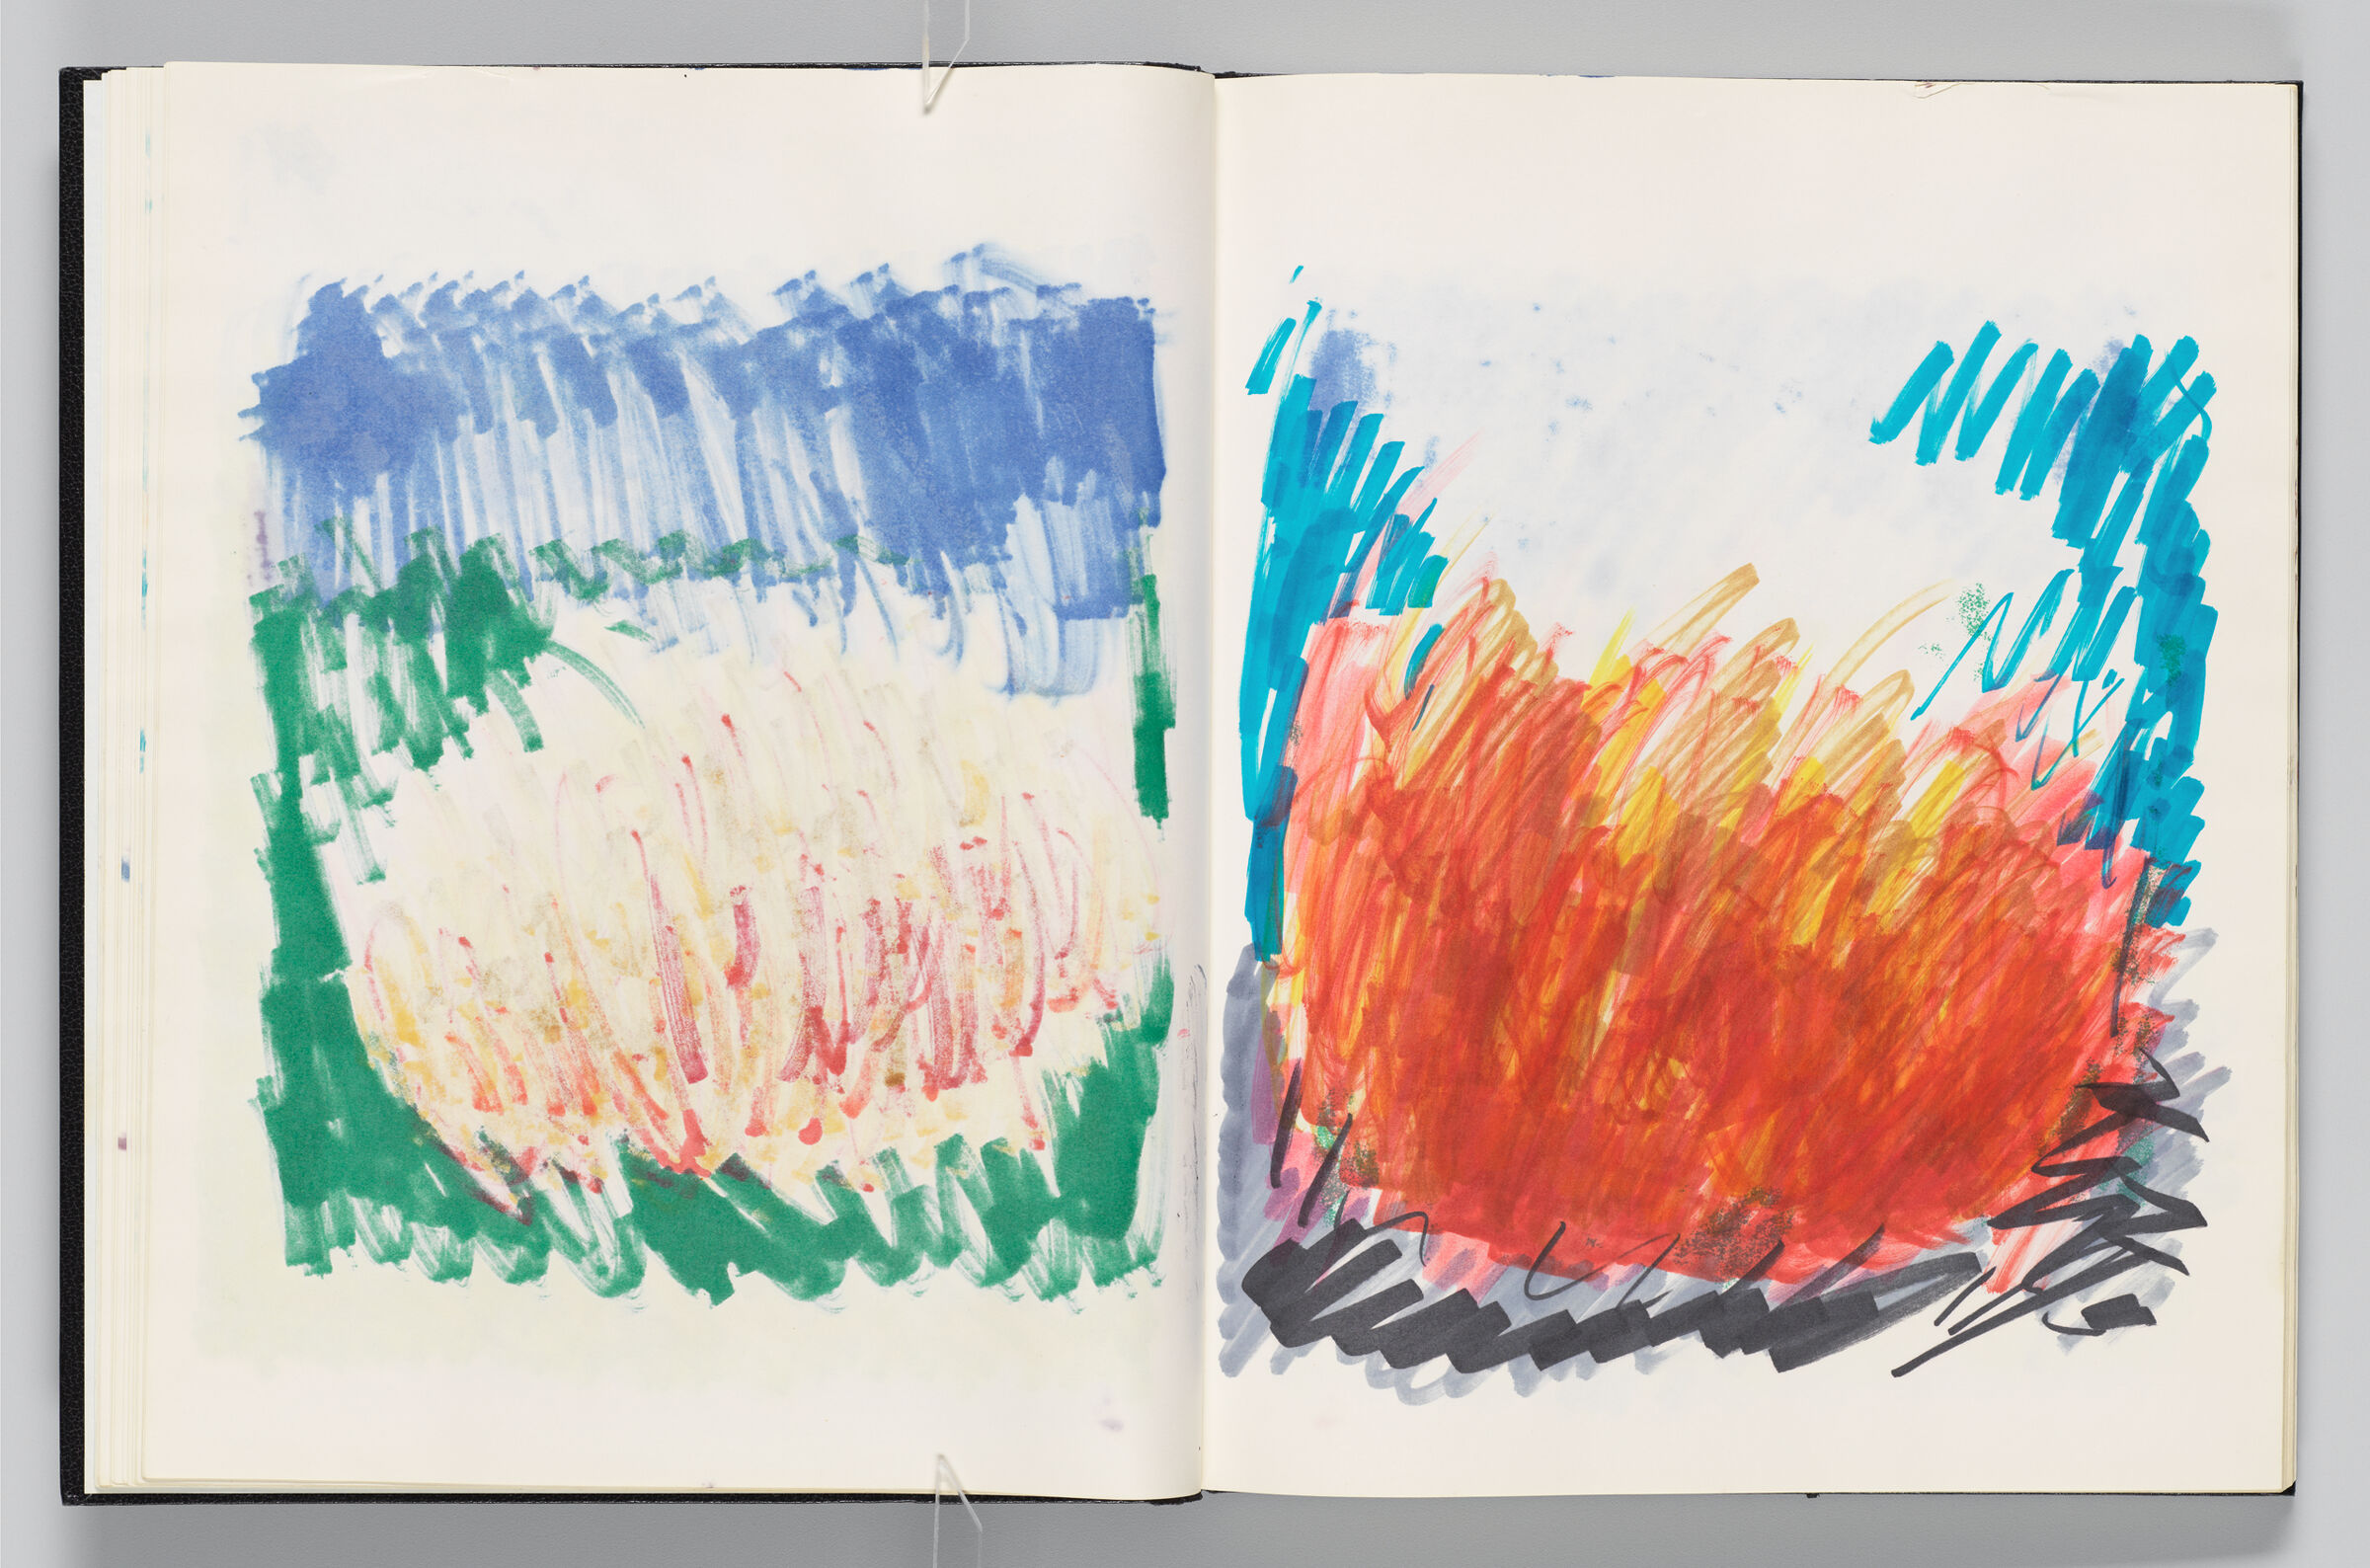 Untitled (Bleed-Through Of Previous Page, Left Page); Untitled (Abstract Sketch, Right Page)